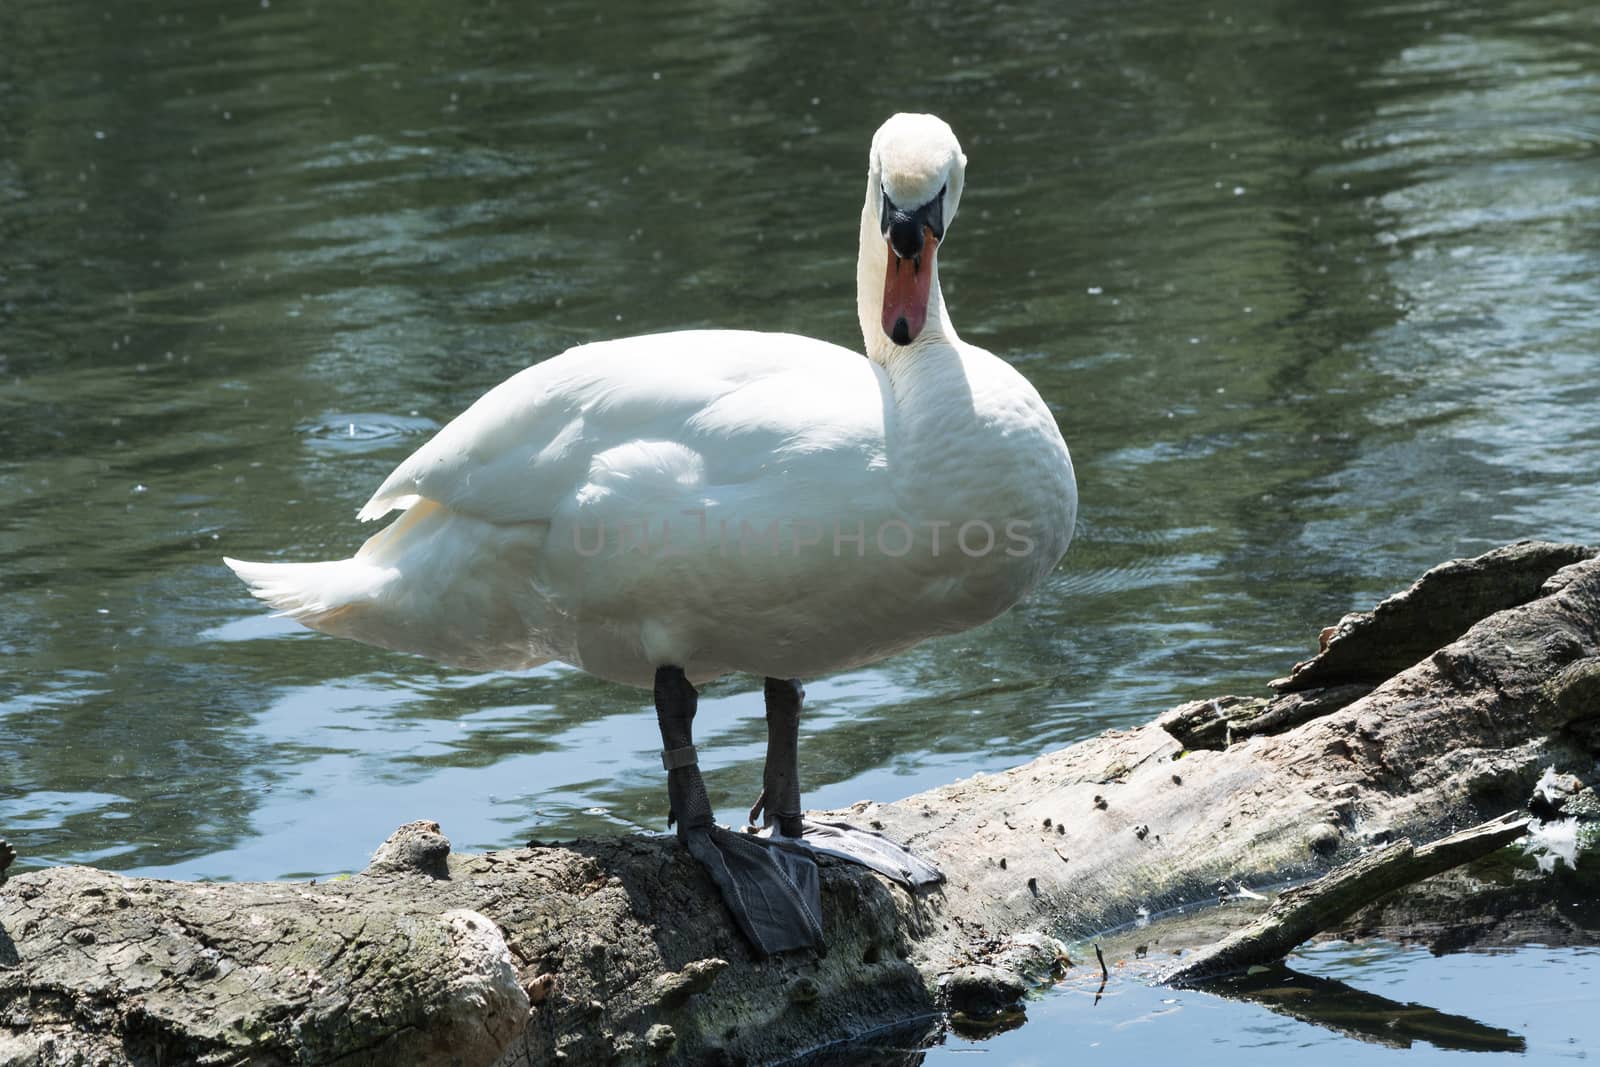 White swan standing on a tree trunk in the lake.